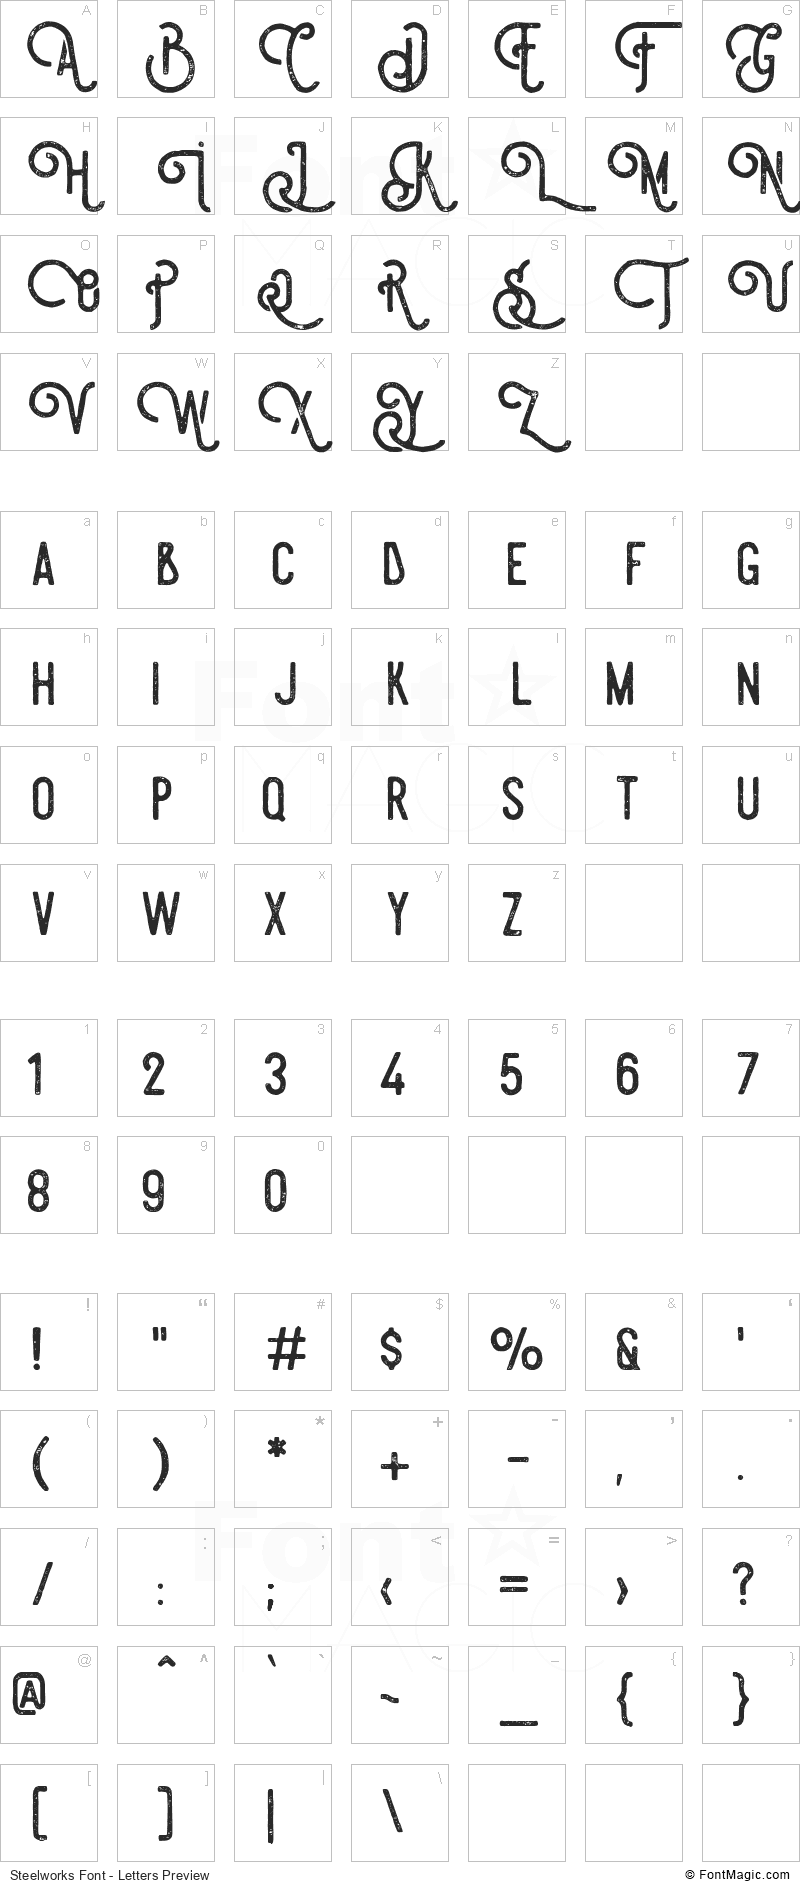 Steelworks Font - All Latters Preview Chart